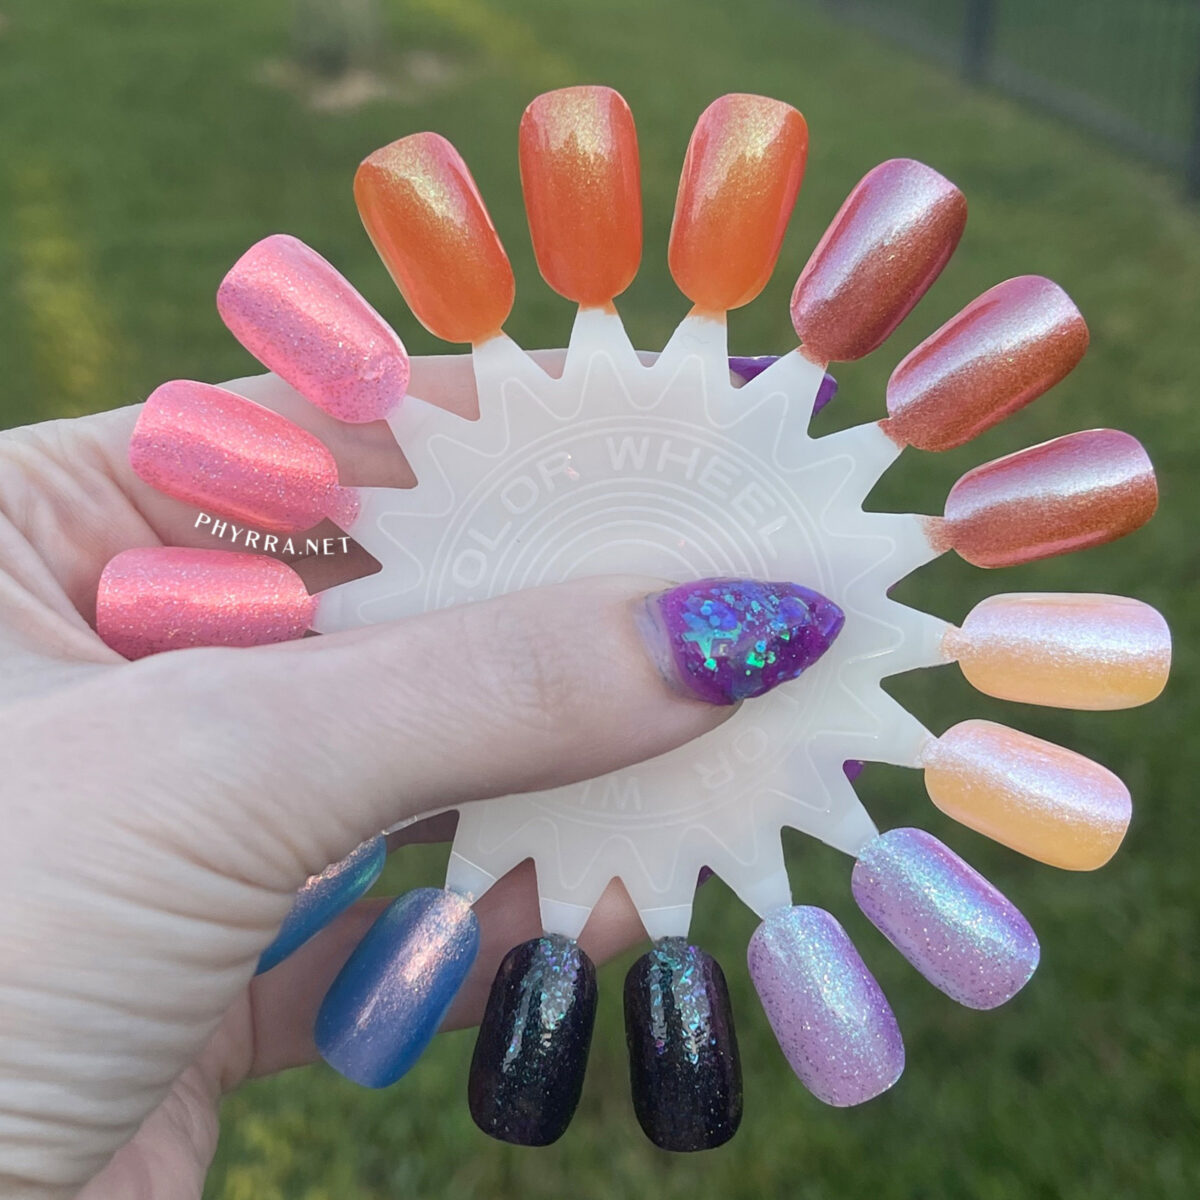 Iridescent Multichrome Indie Nail Polish Swatches Comparison